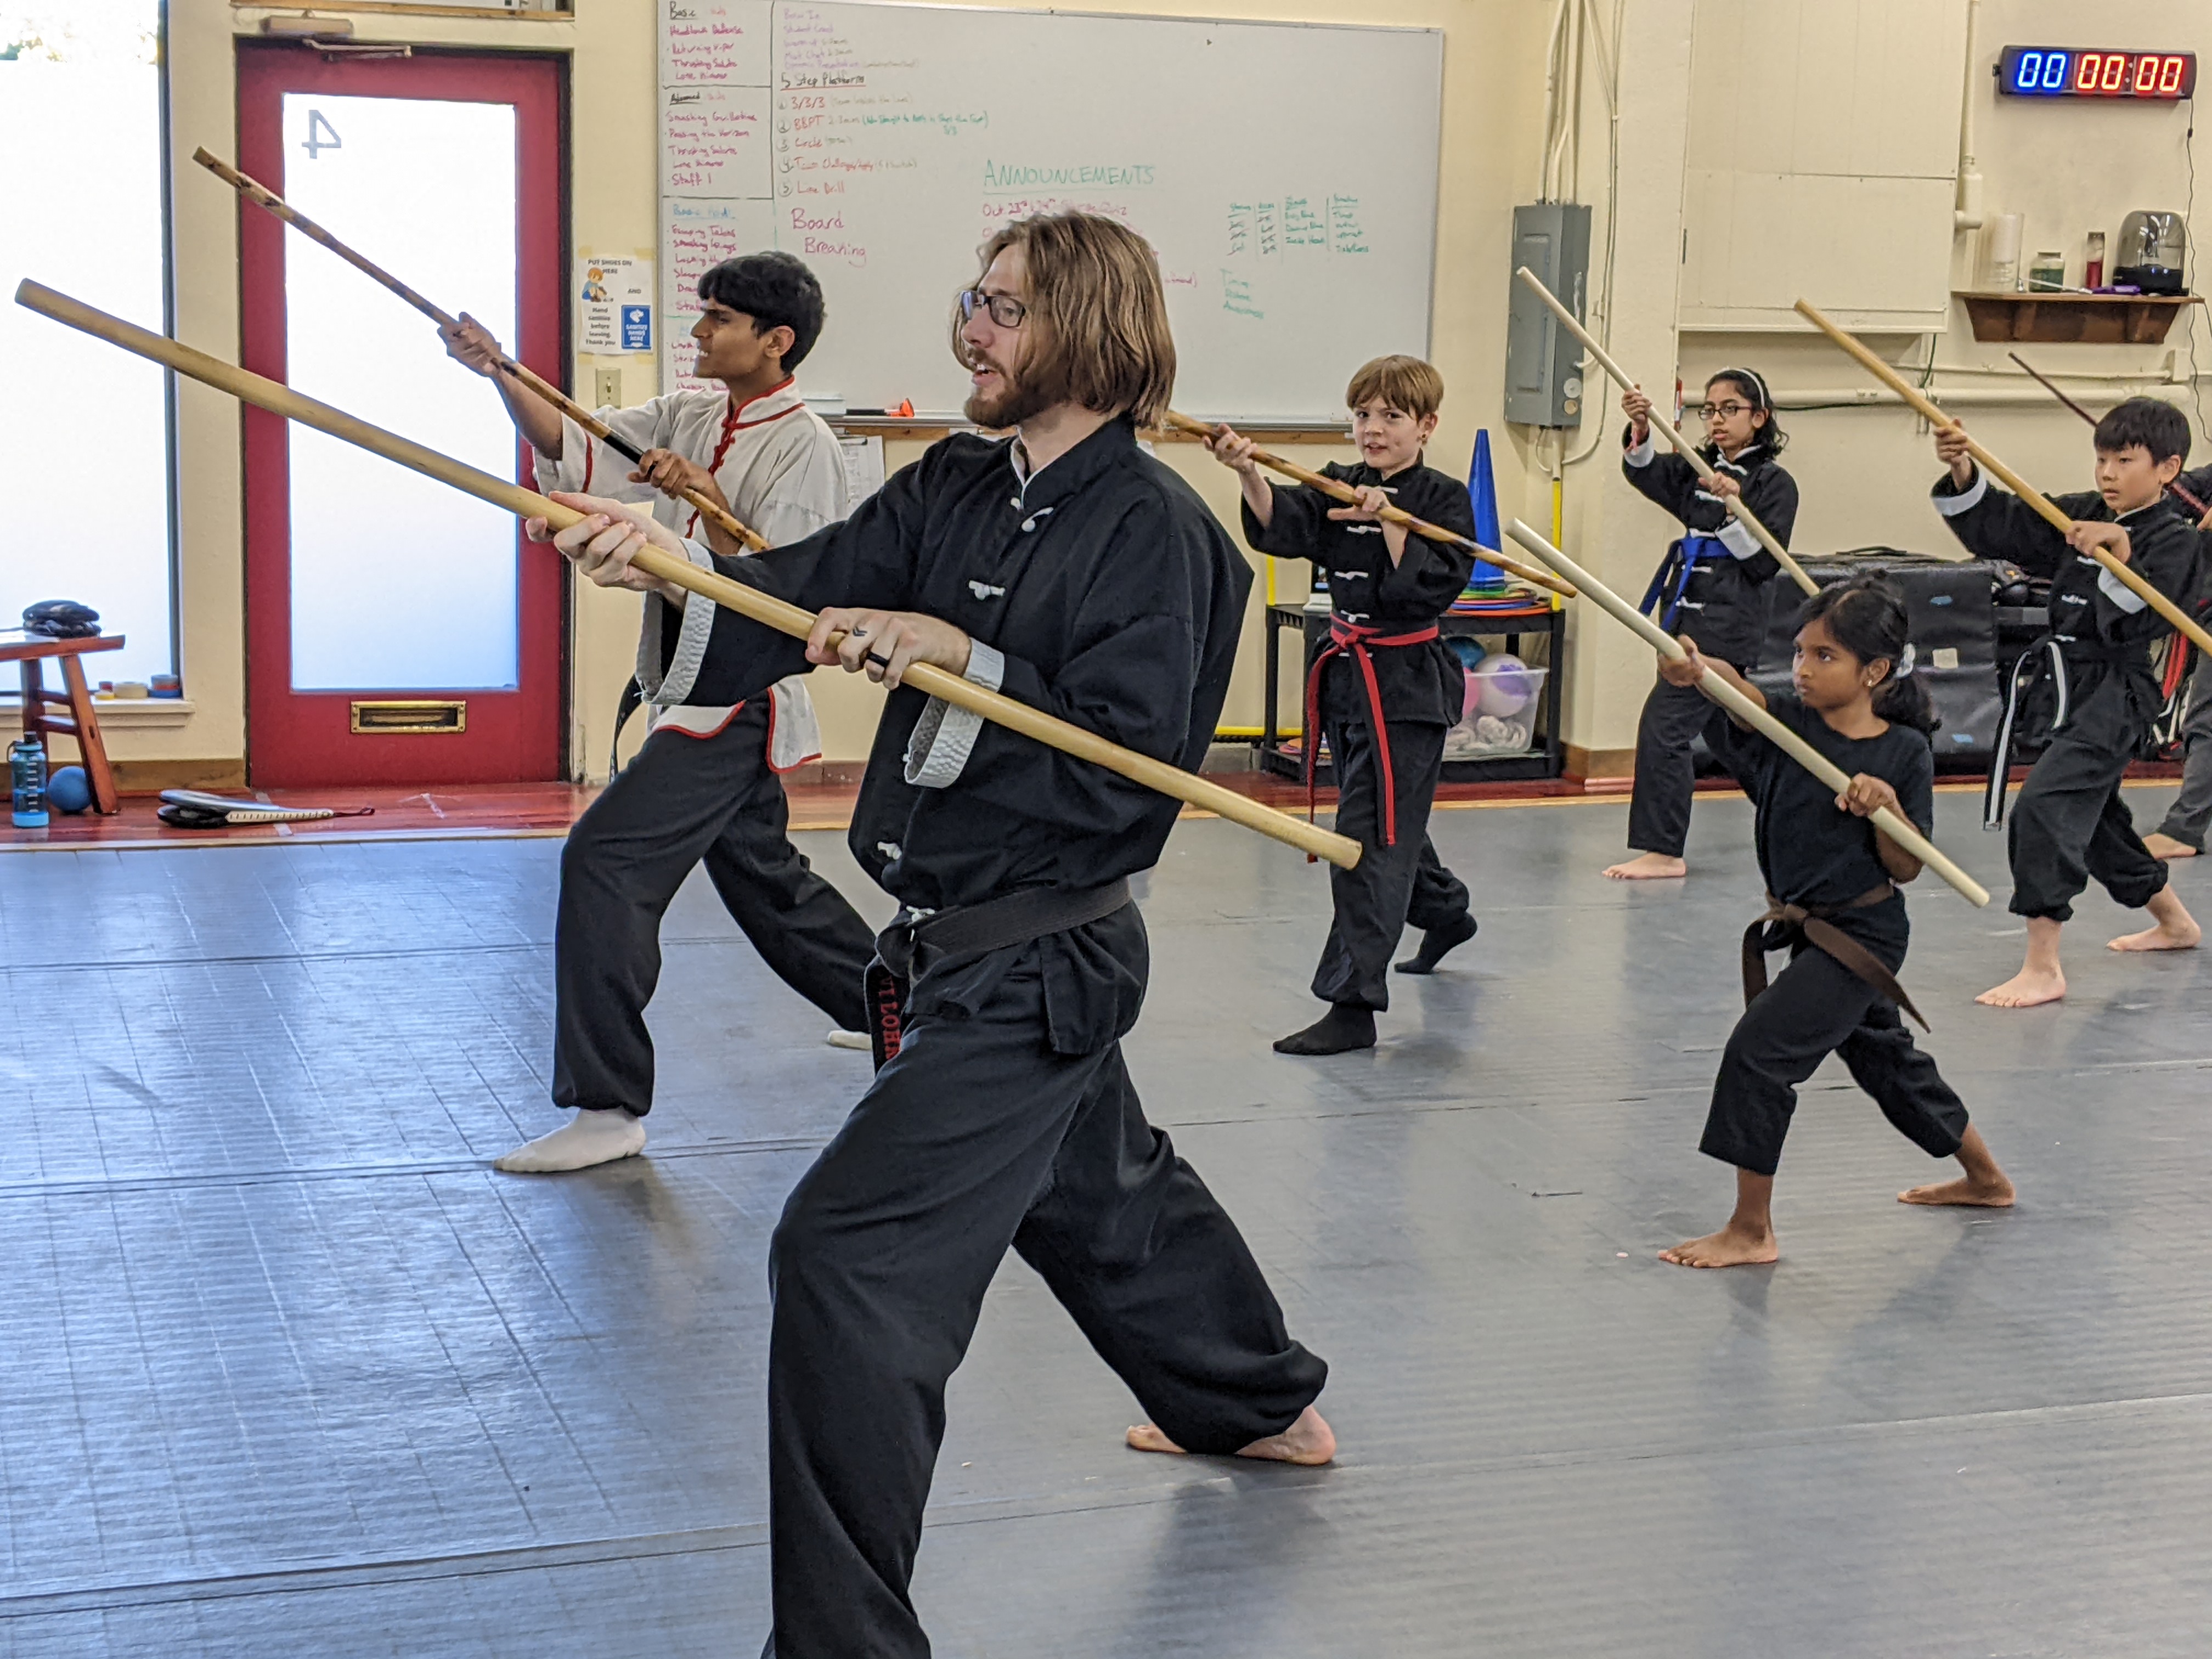 kempo kung fu or karate students training